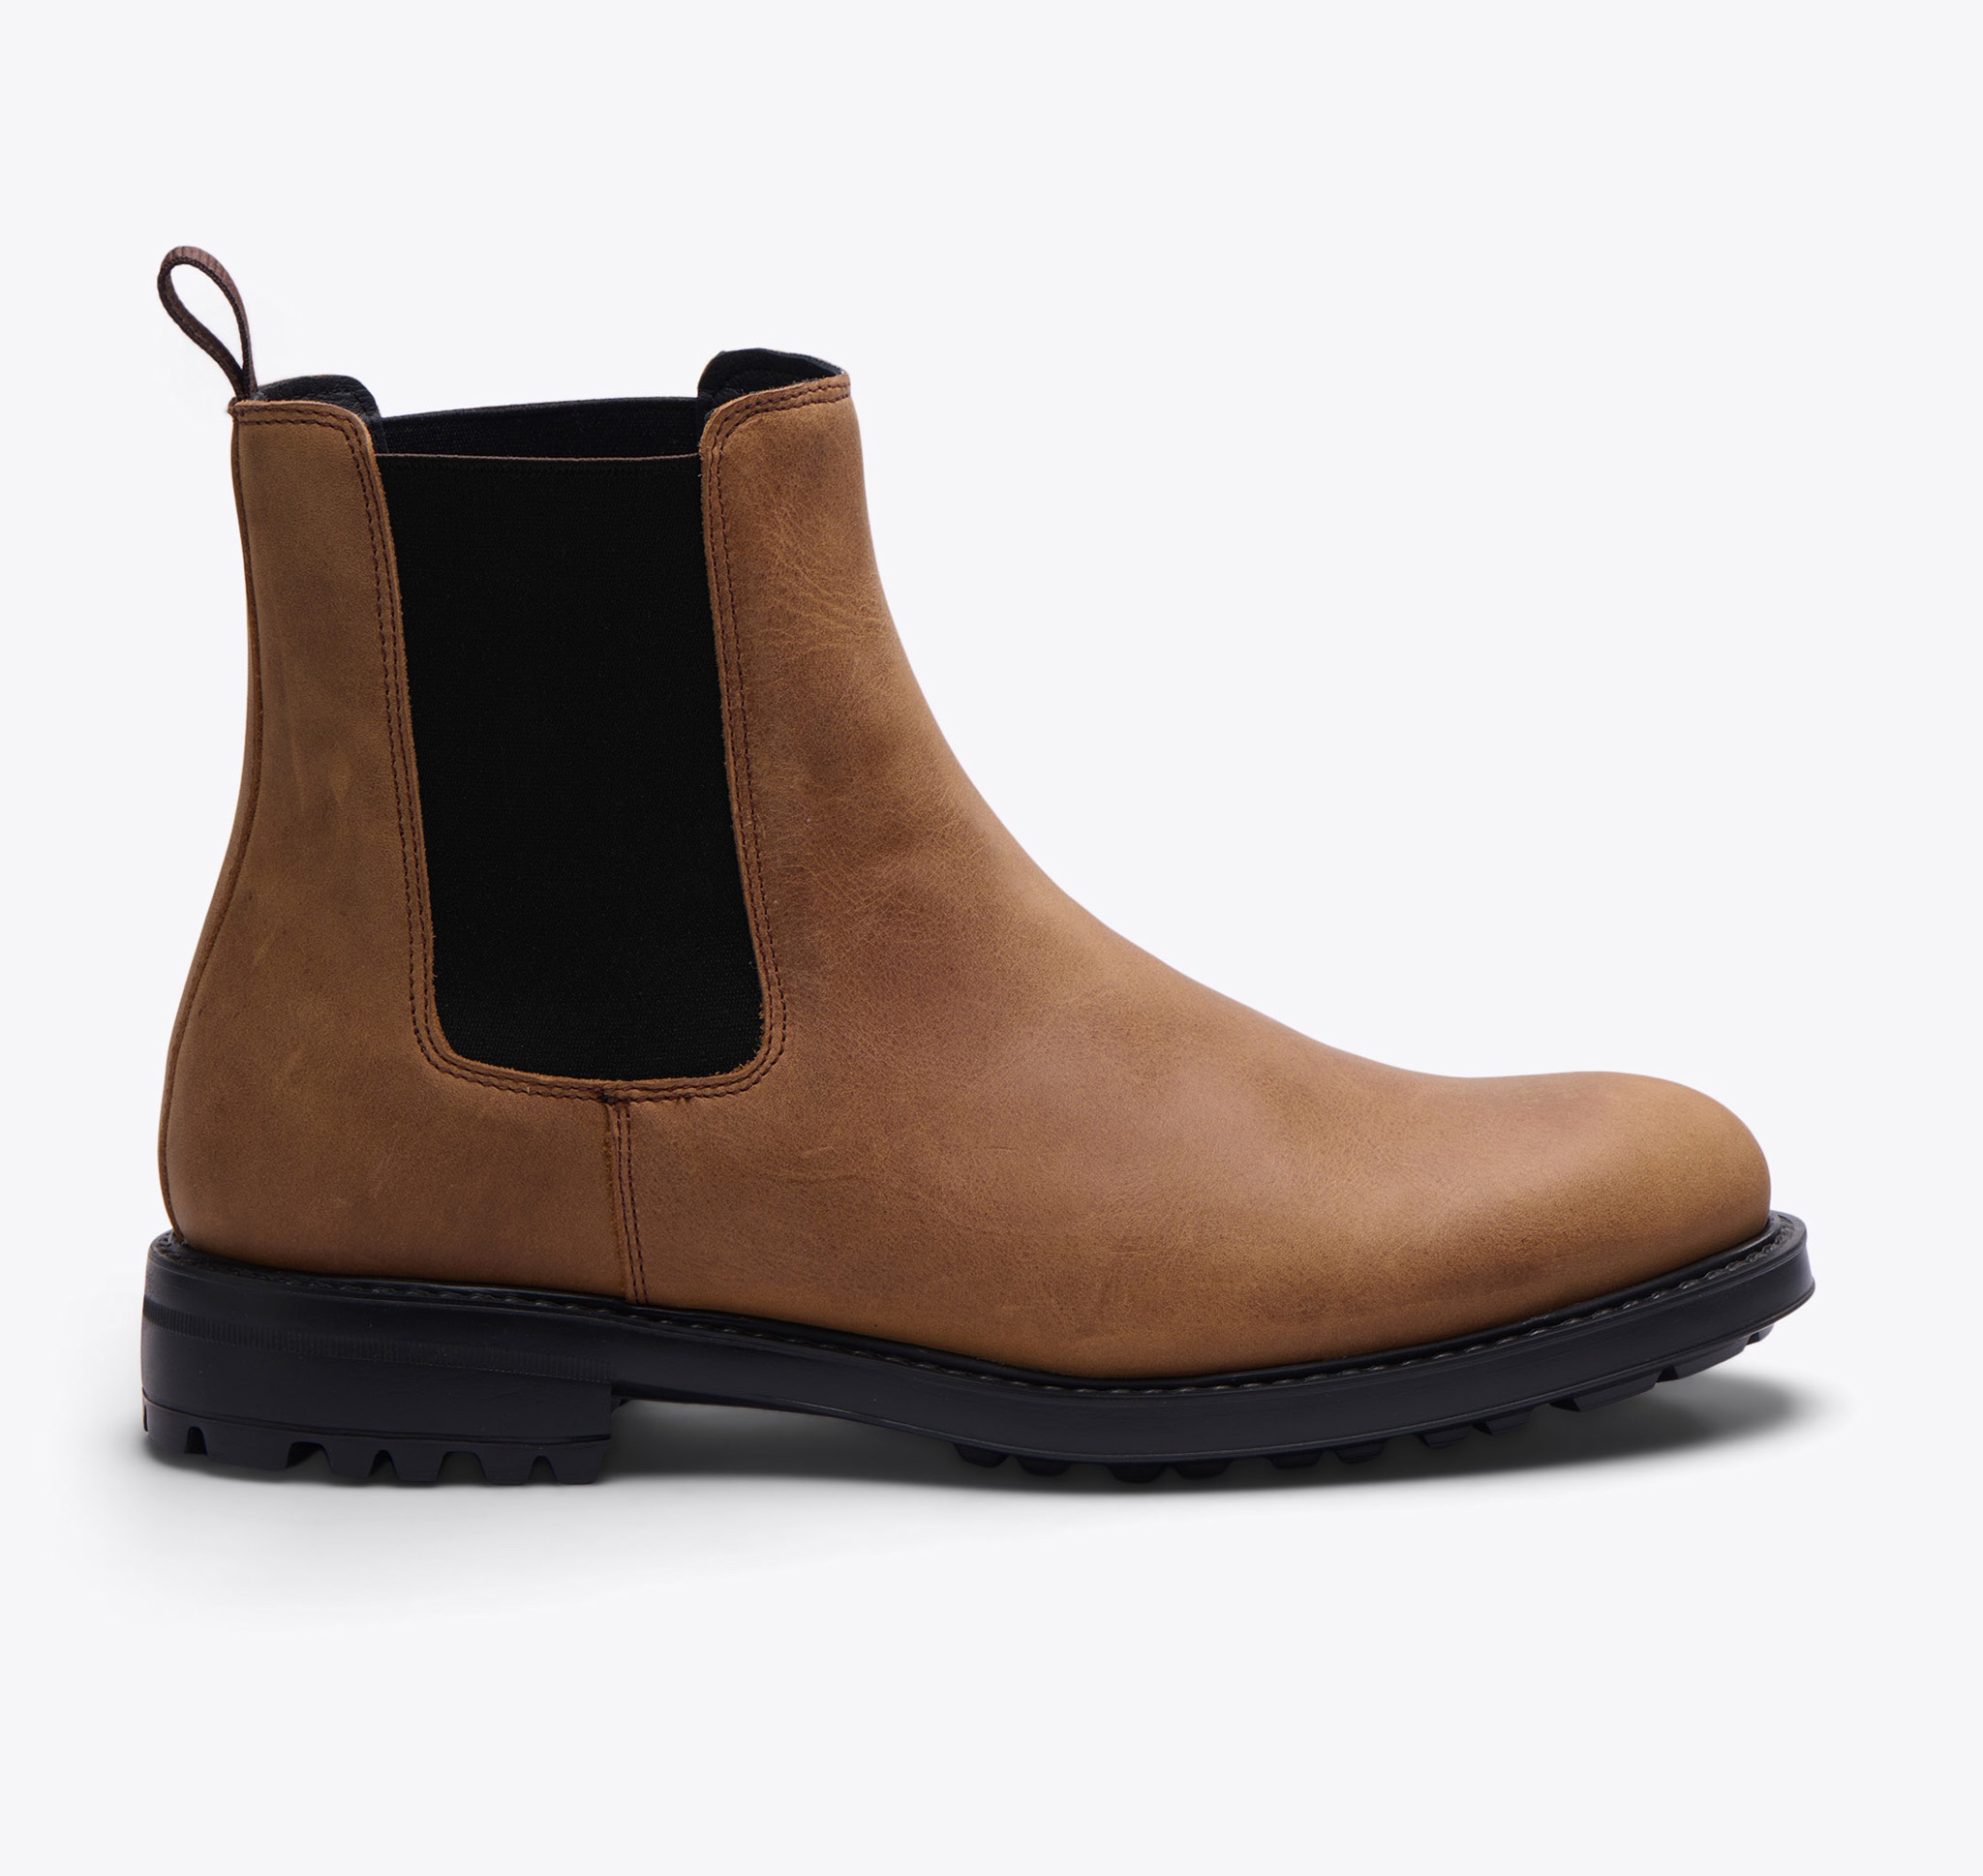 Nisolo Daytripper Chelsea Boot Tobacco - Every Nisolo product is built on the foundation of comfort, function, and design. 